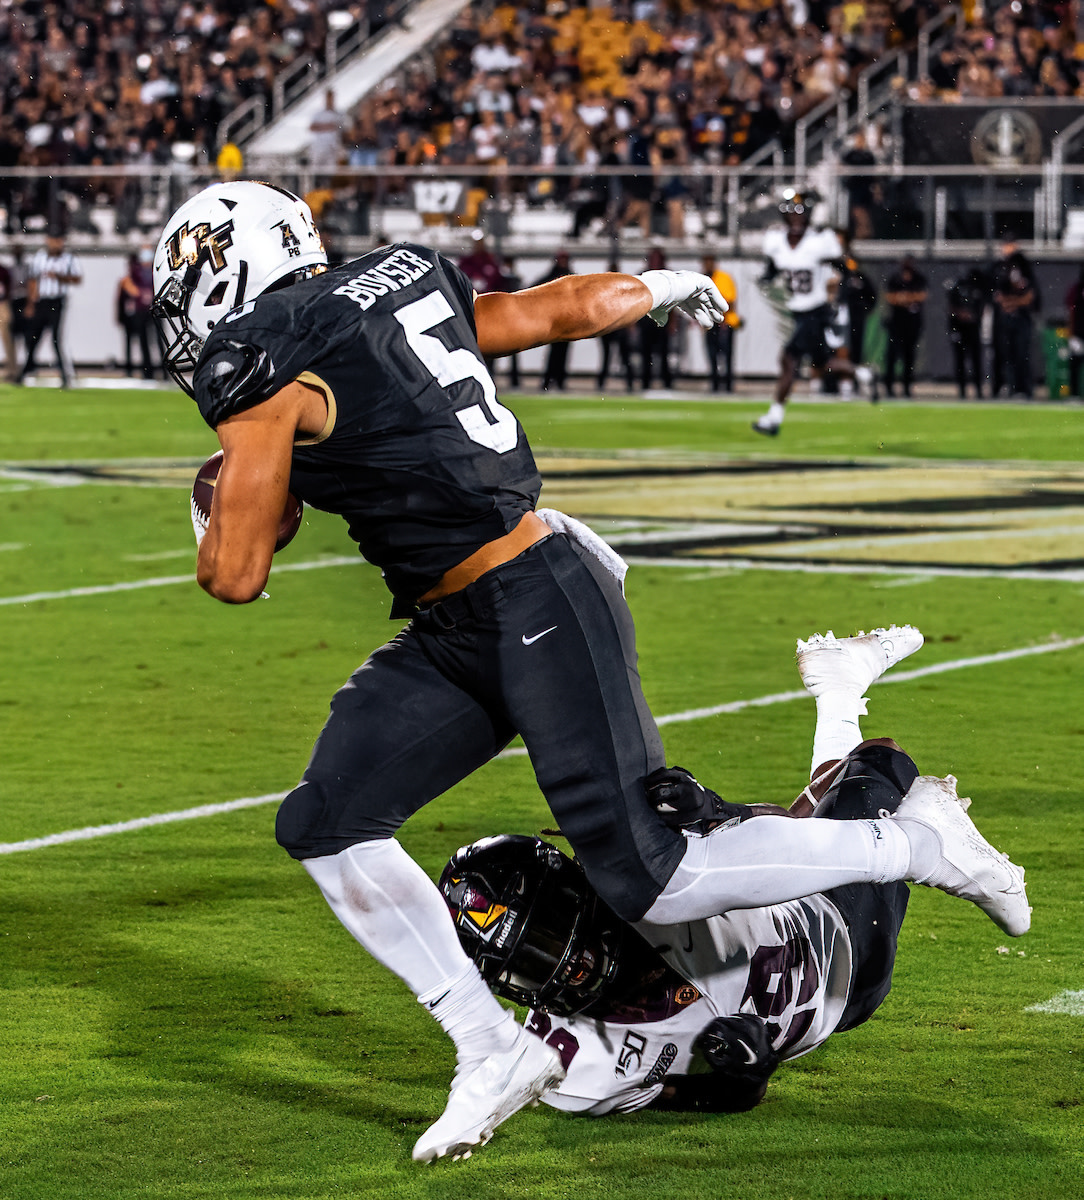 Isaiah Bowswer's ability to break tackles and churn out the rushing yards has been a big part of the UCF offense's success in 2021